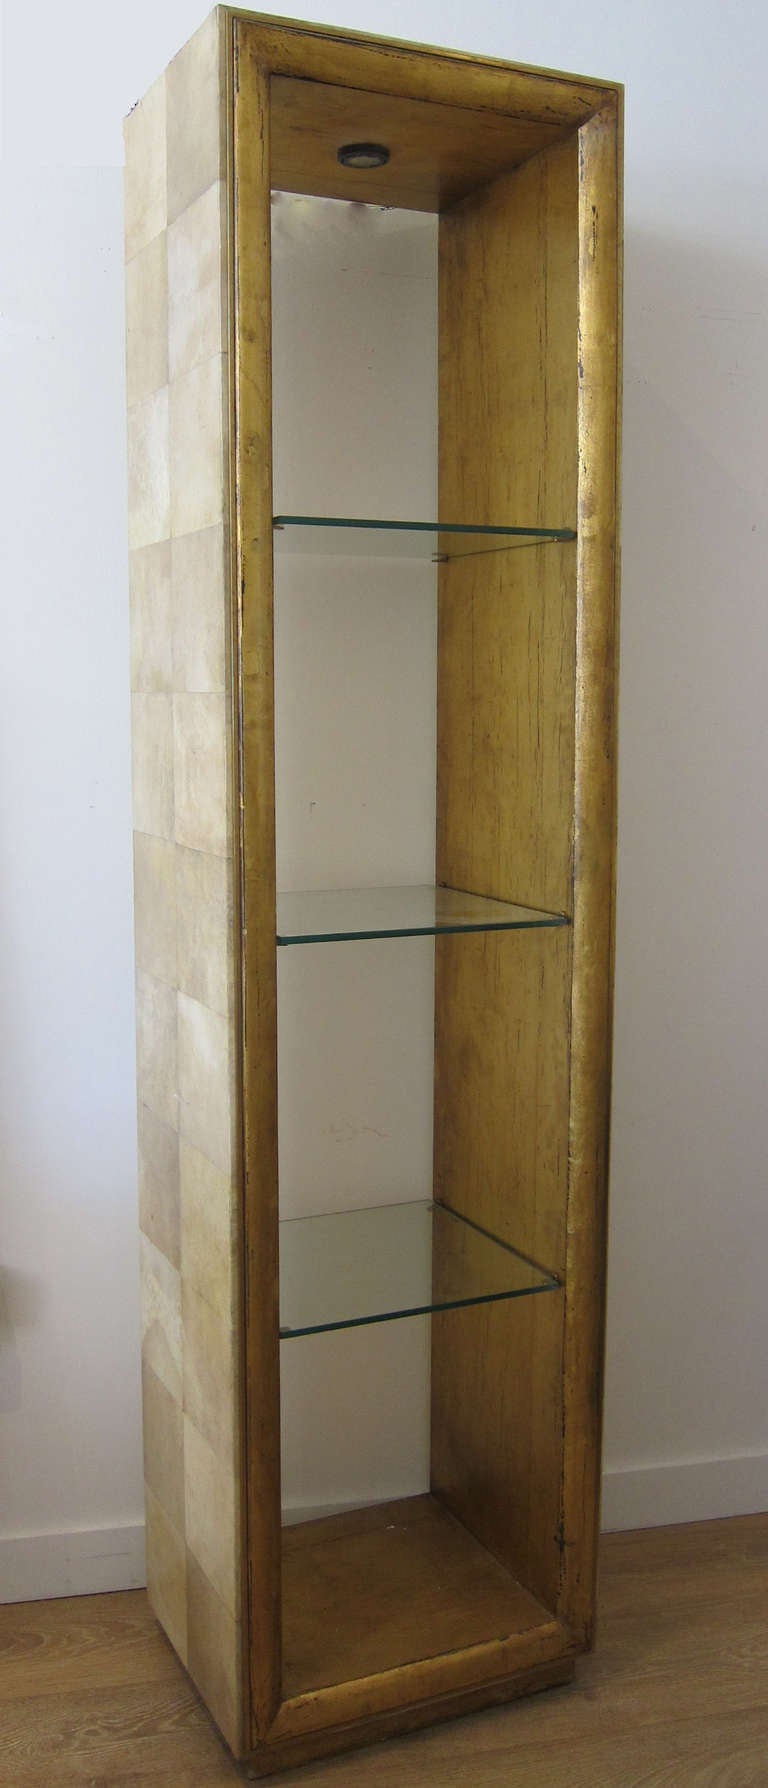 Pair of tall parchment wrapped display shelving with three glass shelves.  Gold leafed interior finish, recessed light.  

This item is located in Manhattan at 1stdibs@NYDC showroom.  200 Lexington Ave.  10th Floor, NYC.